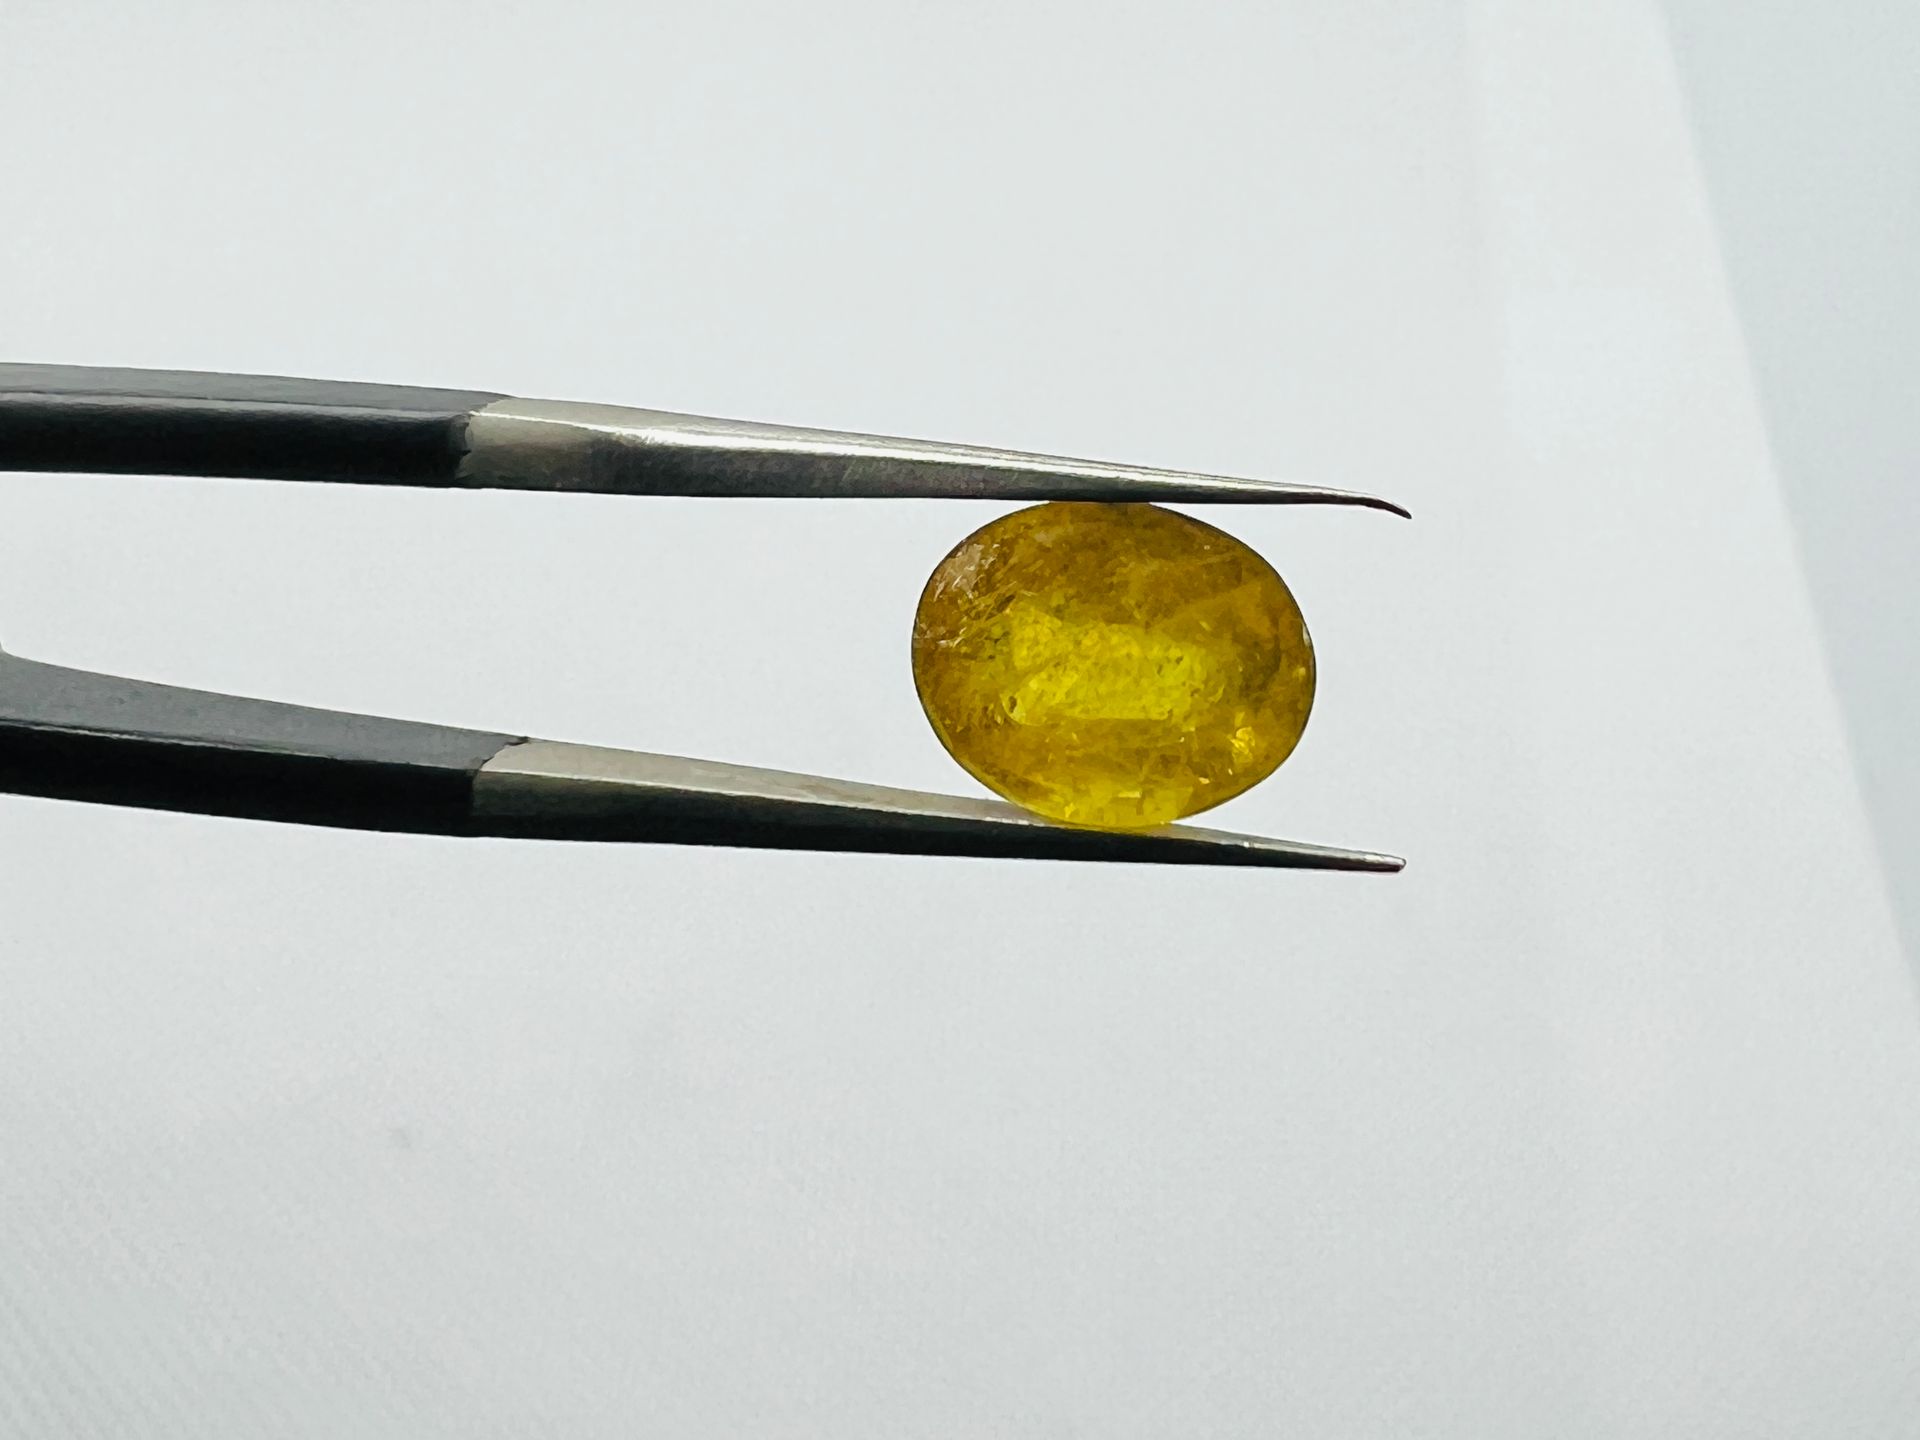 SAPHIRE YELLOW SAPHIRE of 2.94 carats AIGT certificate